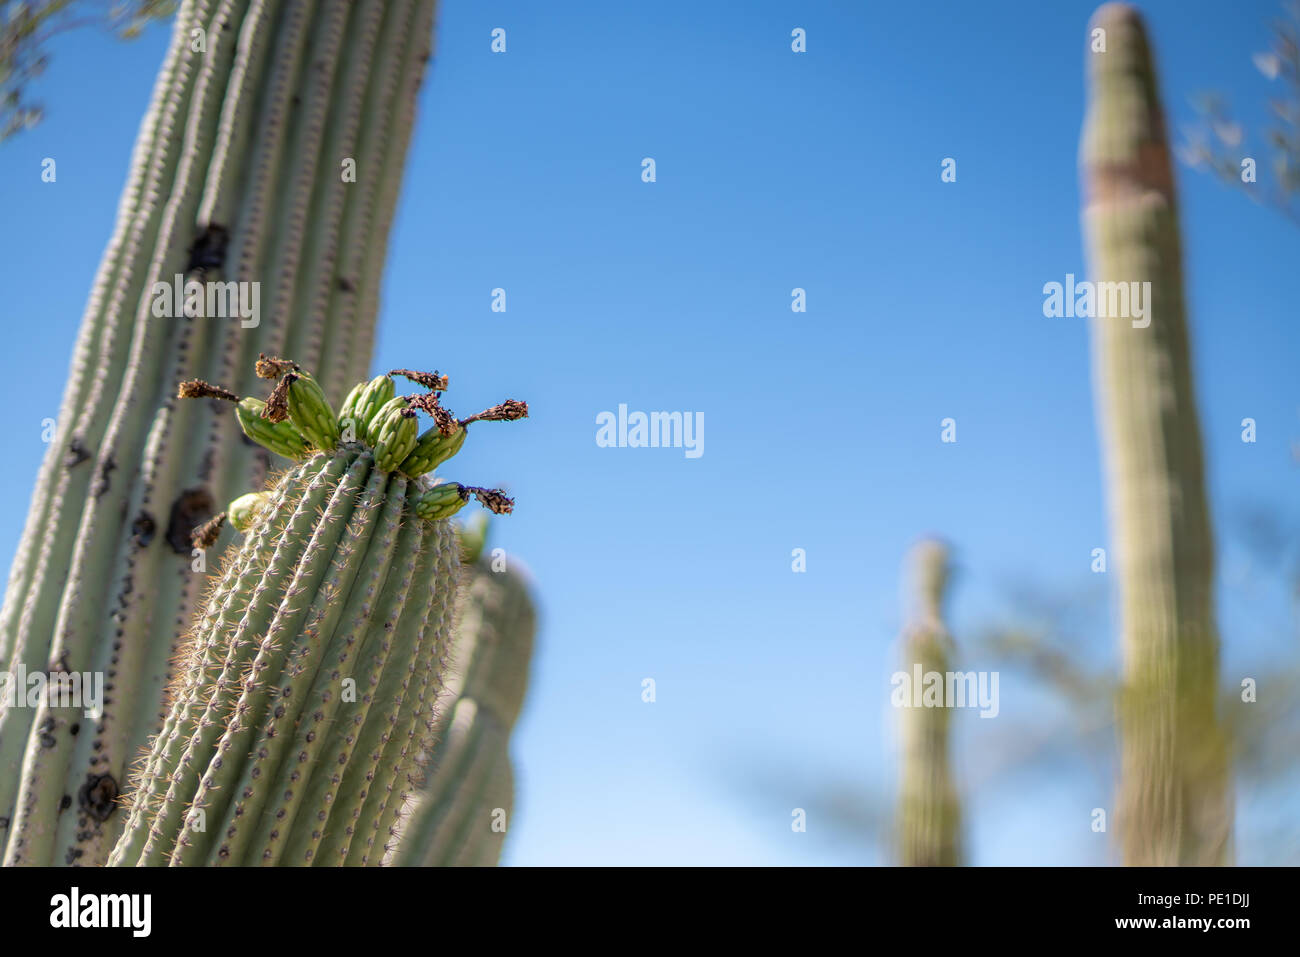 Saguaro Cactus Blossoms with White Flower and Fruit Stock Photo